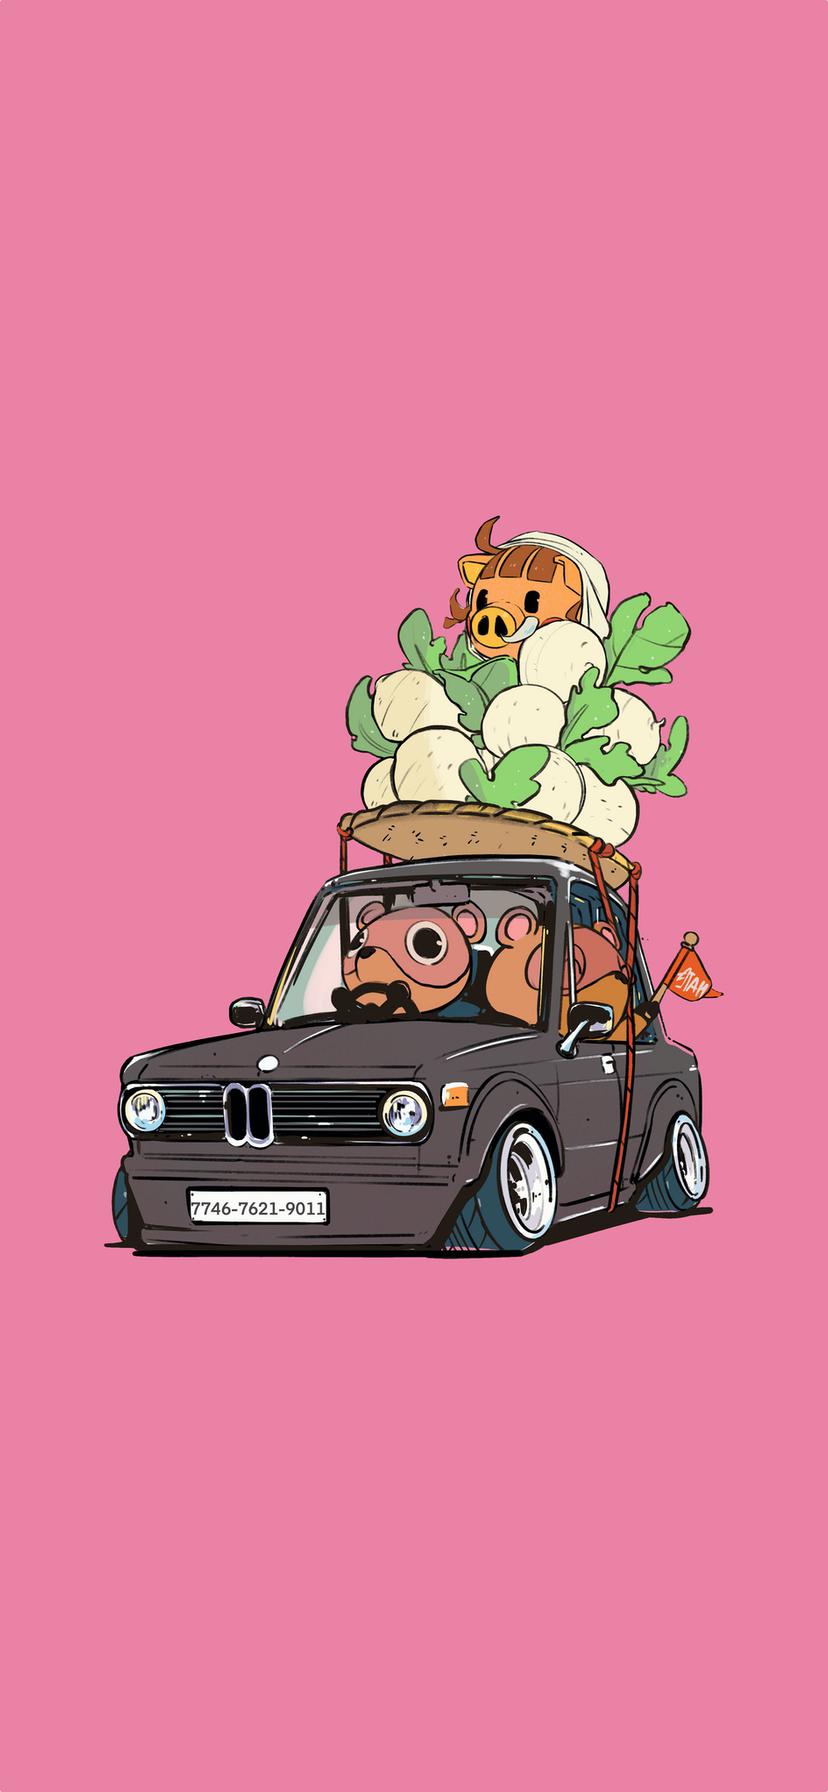 Made A Phone Wallpaper Out Of U Otahdraws' Great Image Of Daisy Mae Hitching A Ride With The Nooklings